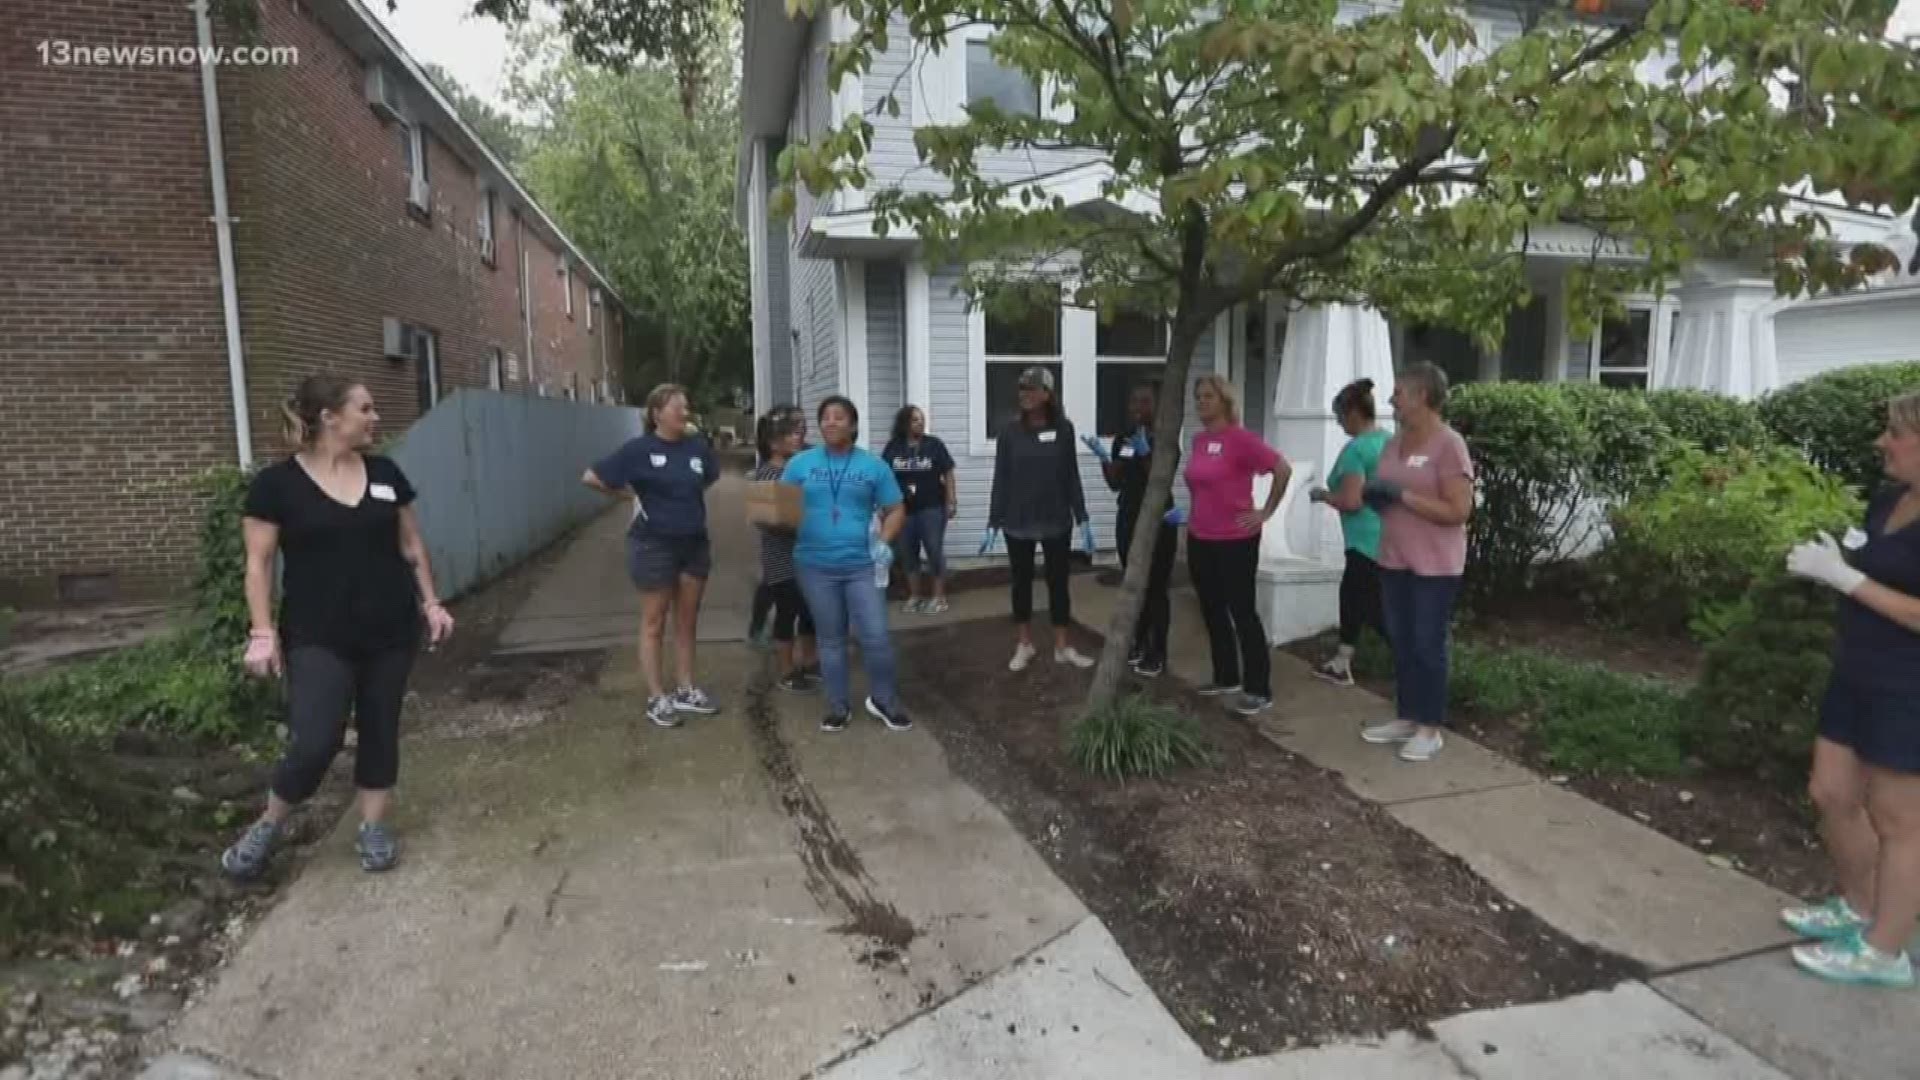 Many groups took part in improving their communities during the United Way's Day of Giving. One of the sites they helped out at was Haven House.